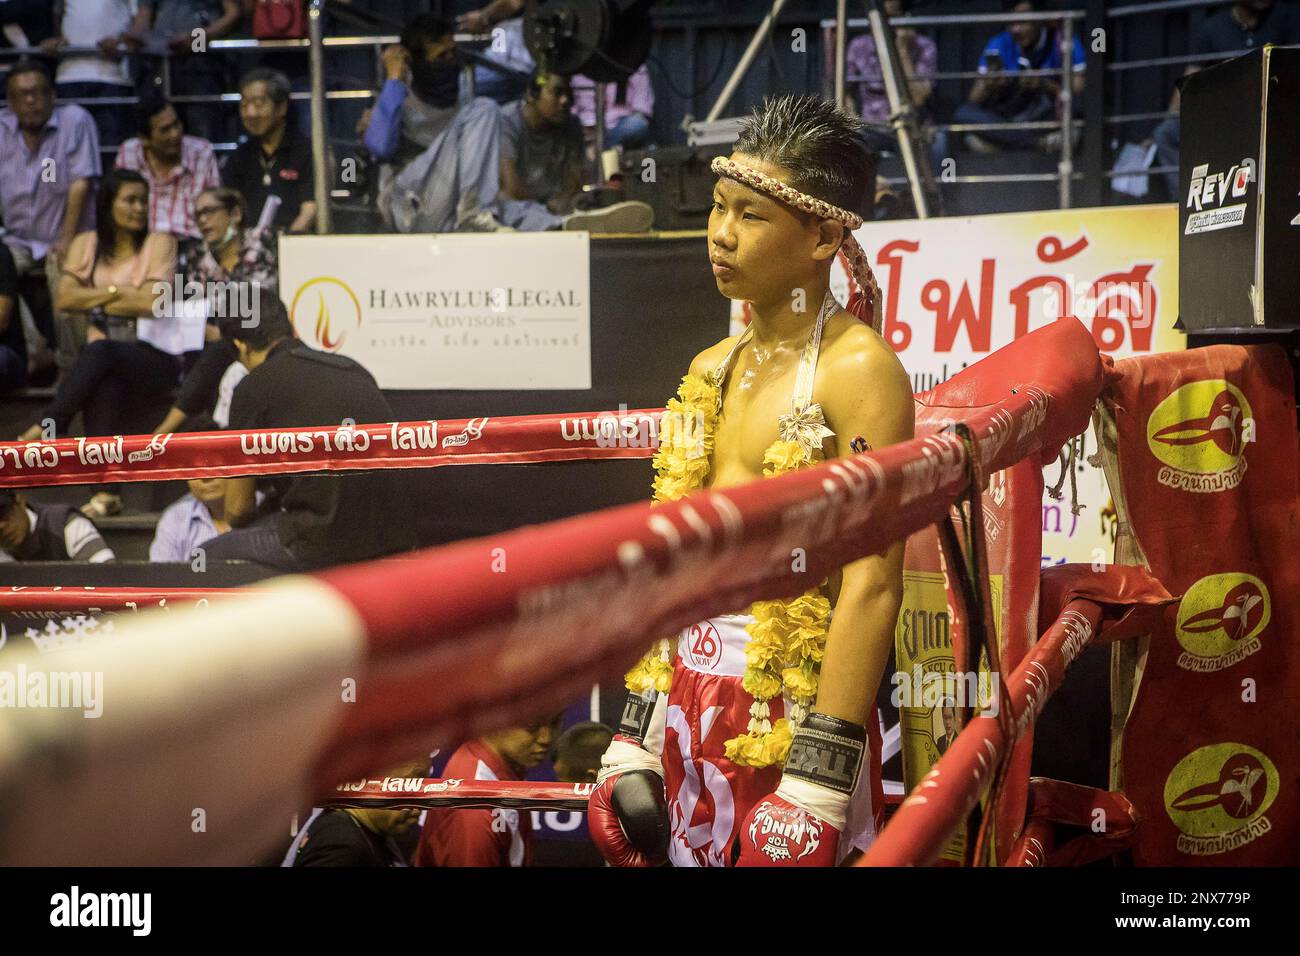 Presentation of the fight. Muay Thai fighter going through pre-fight ritual, Thailand Stock Photo